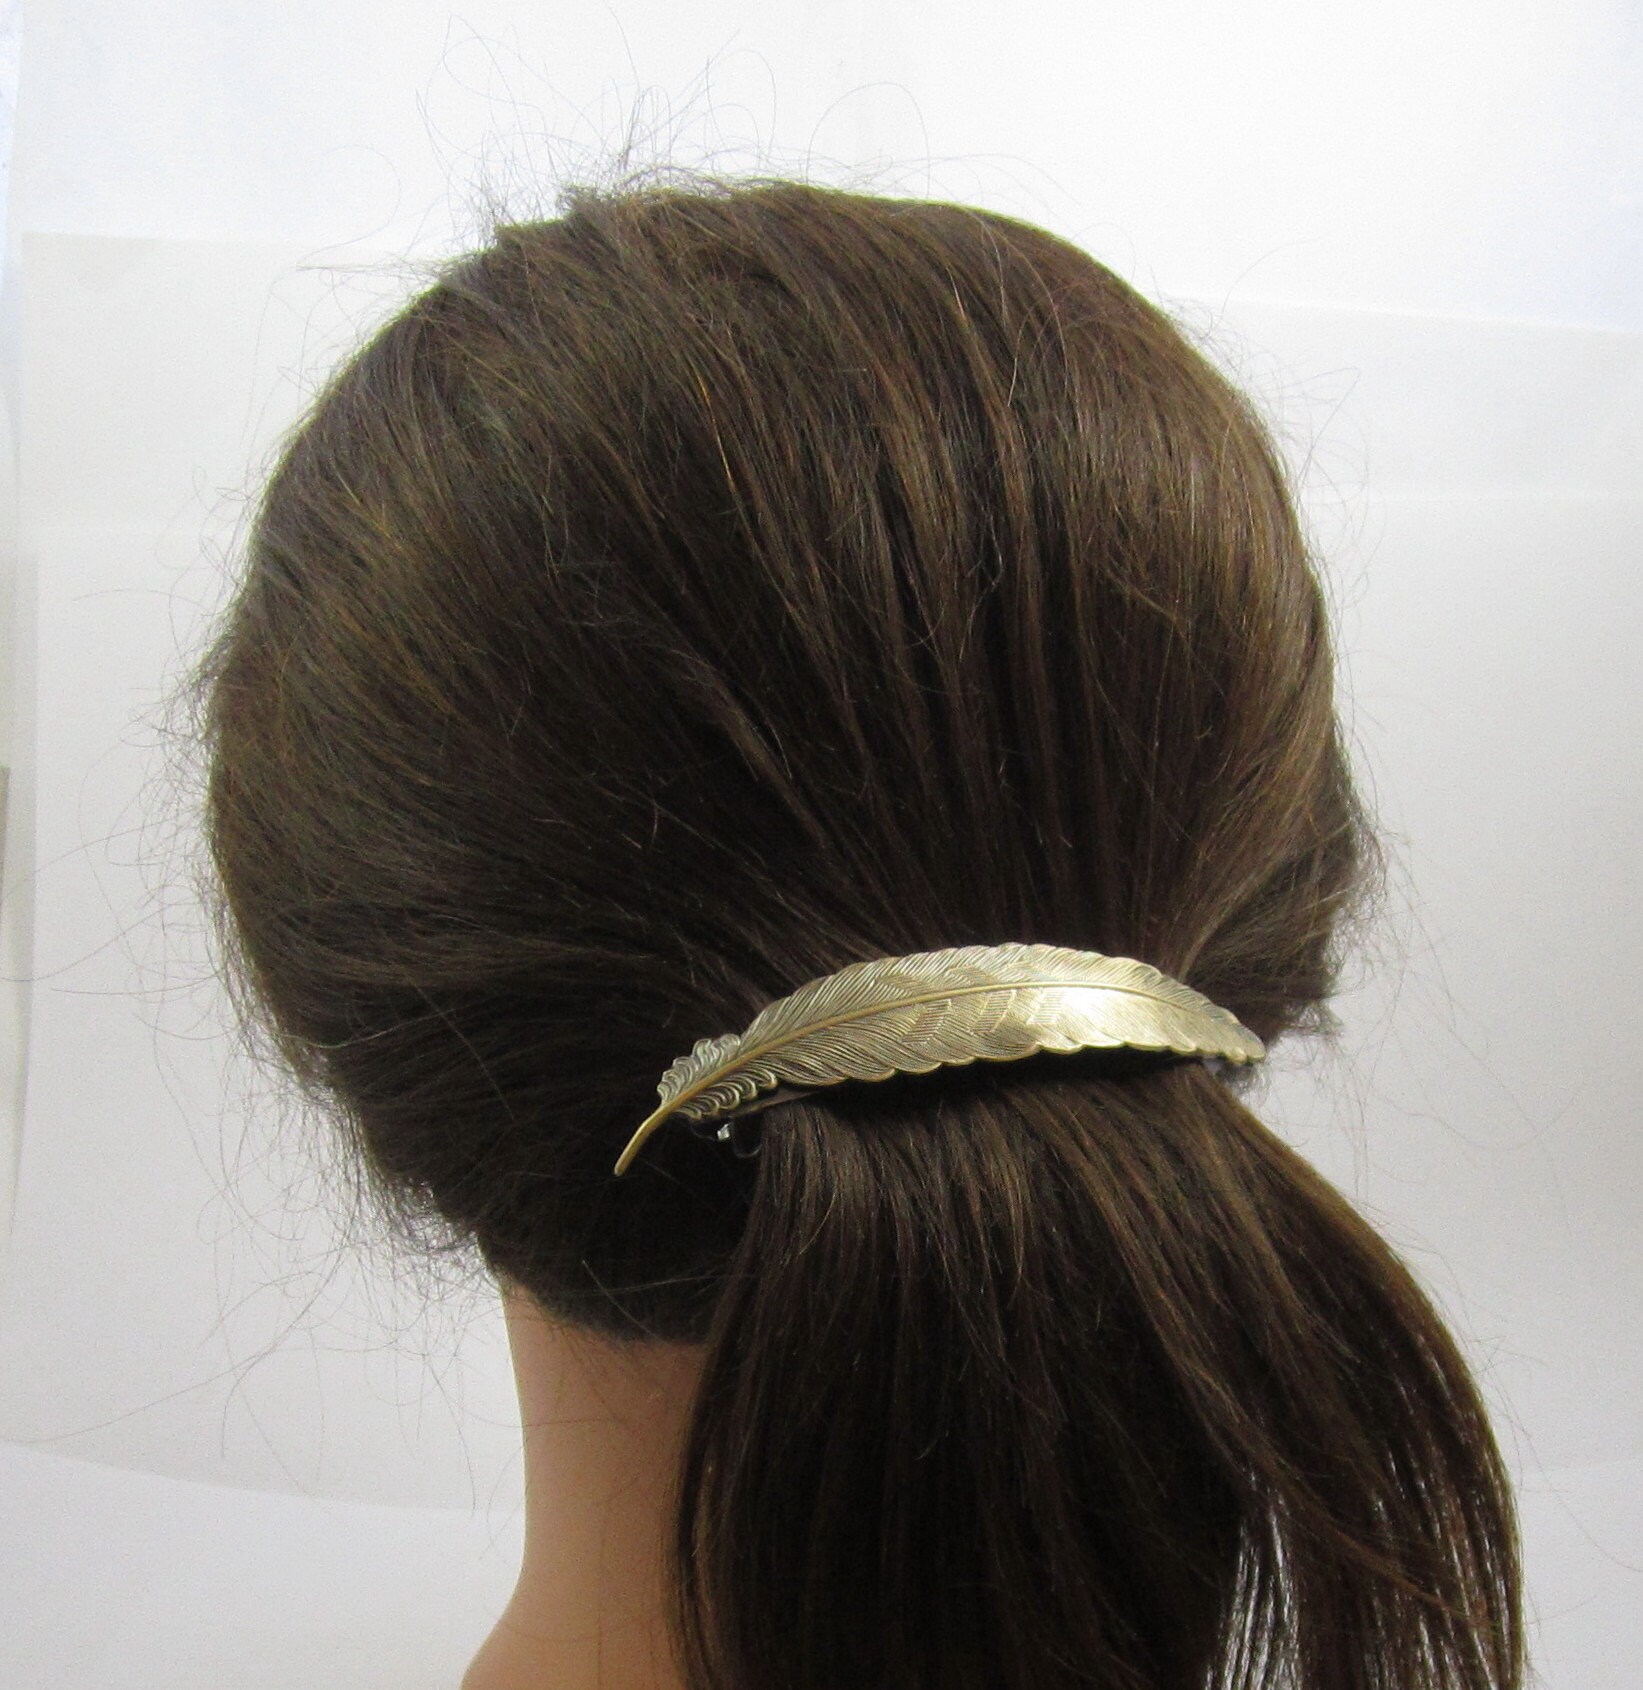 FEATHER HAIR CLIP FEATHERS HAIR BARRETTES FRENCH CLIPS THICK HAIR CLIPS 